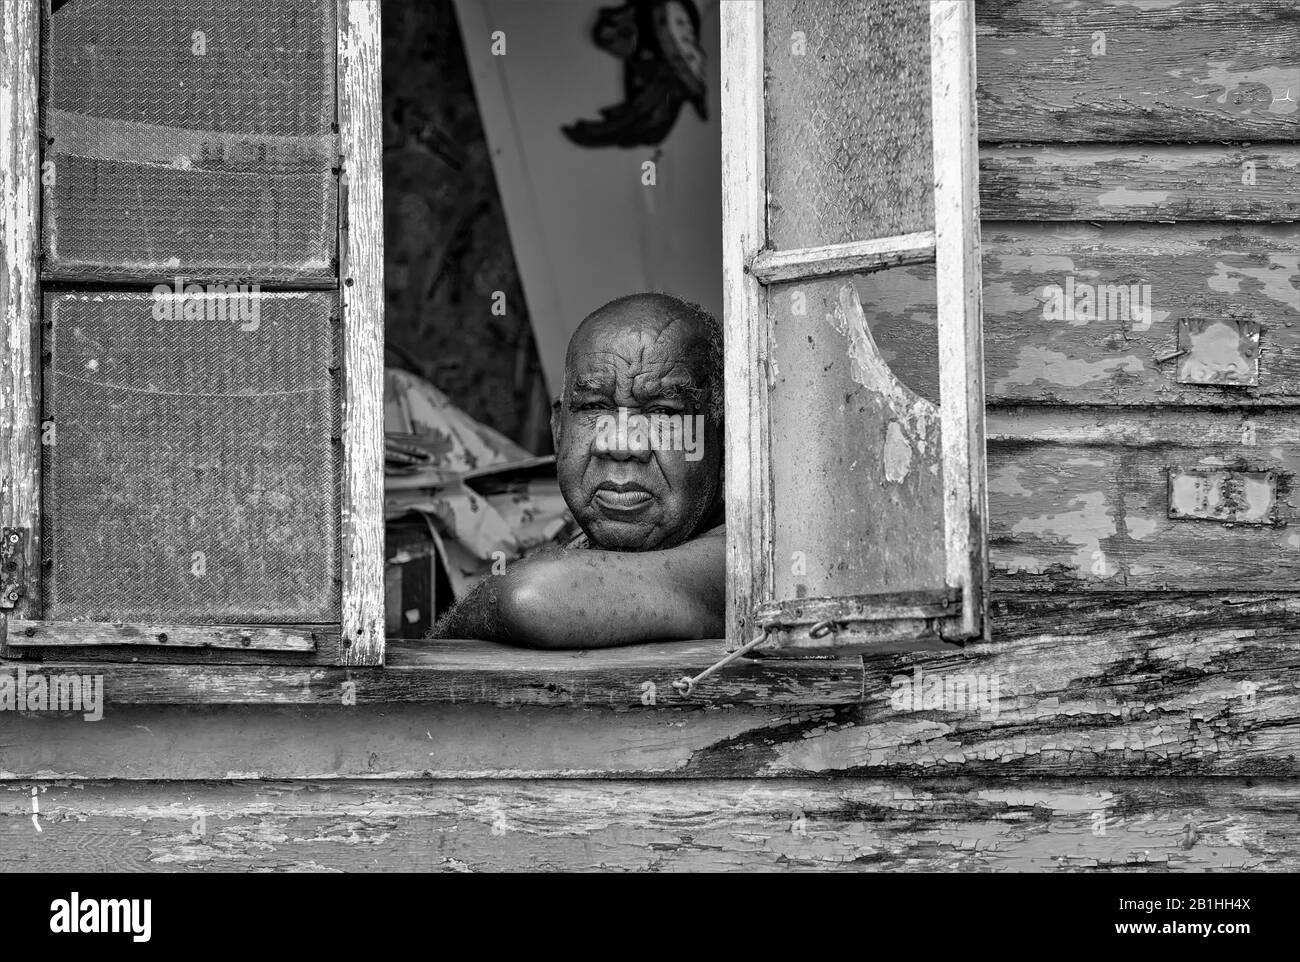 Wooden shanty houses on the Caribbean island of Barbados, peeling paint, culture, lifestyle, off the beaten track, hard lives, poor life, surviving Stock Photo